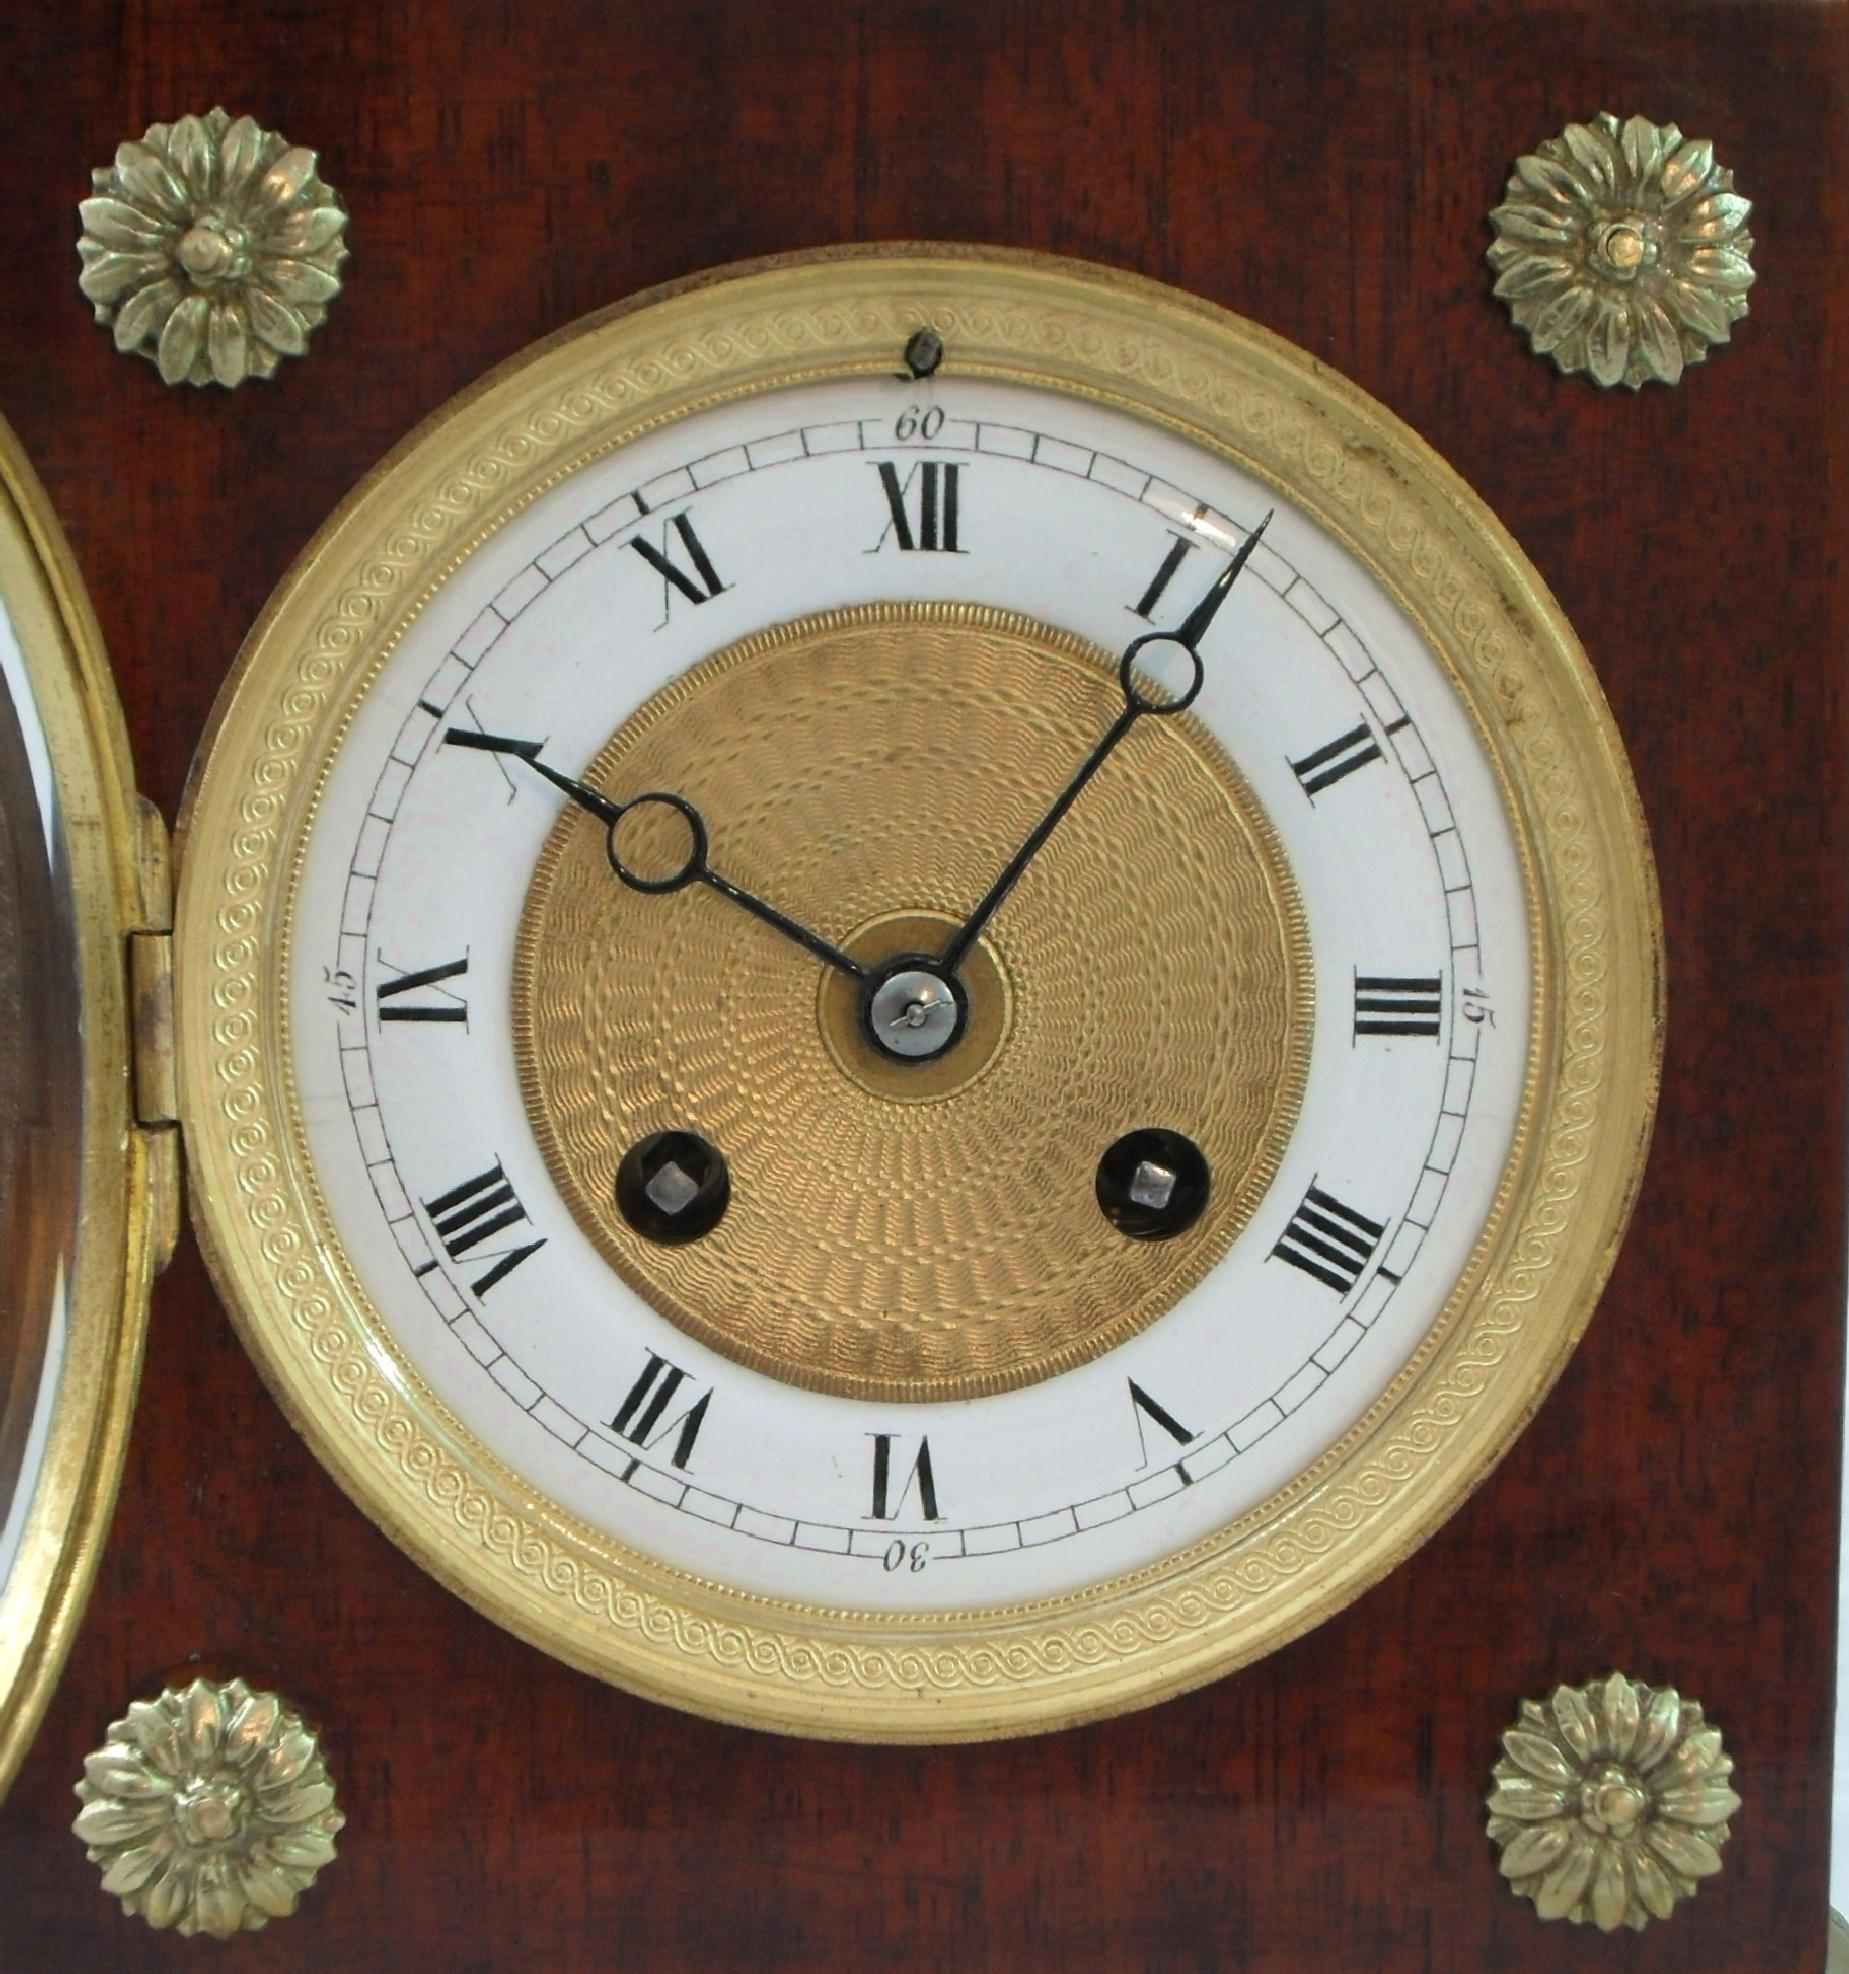 Belle Époque French Belle Epoque Mahogany Mantel Clock with Side Viewing Windows